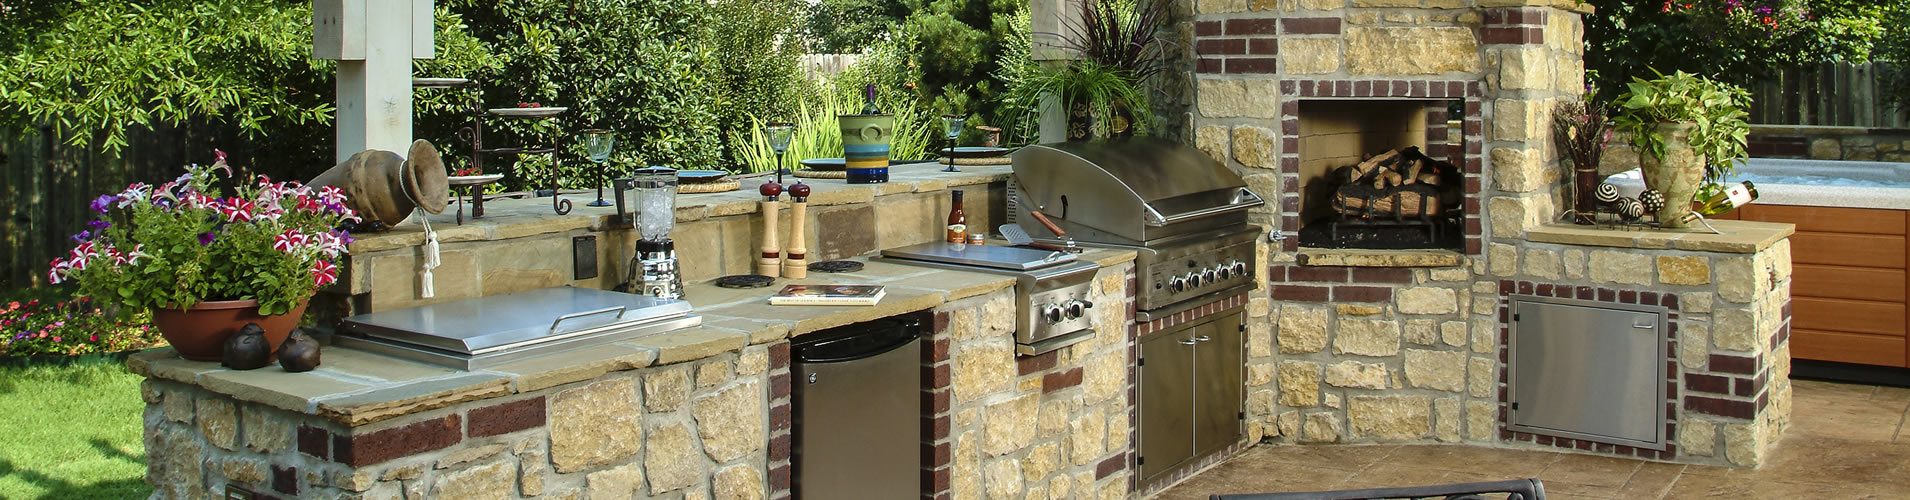 Outdoor Kitchens & Bars Dallas, Fort Worth, Arlington and Surrounding